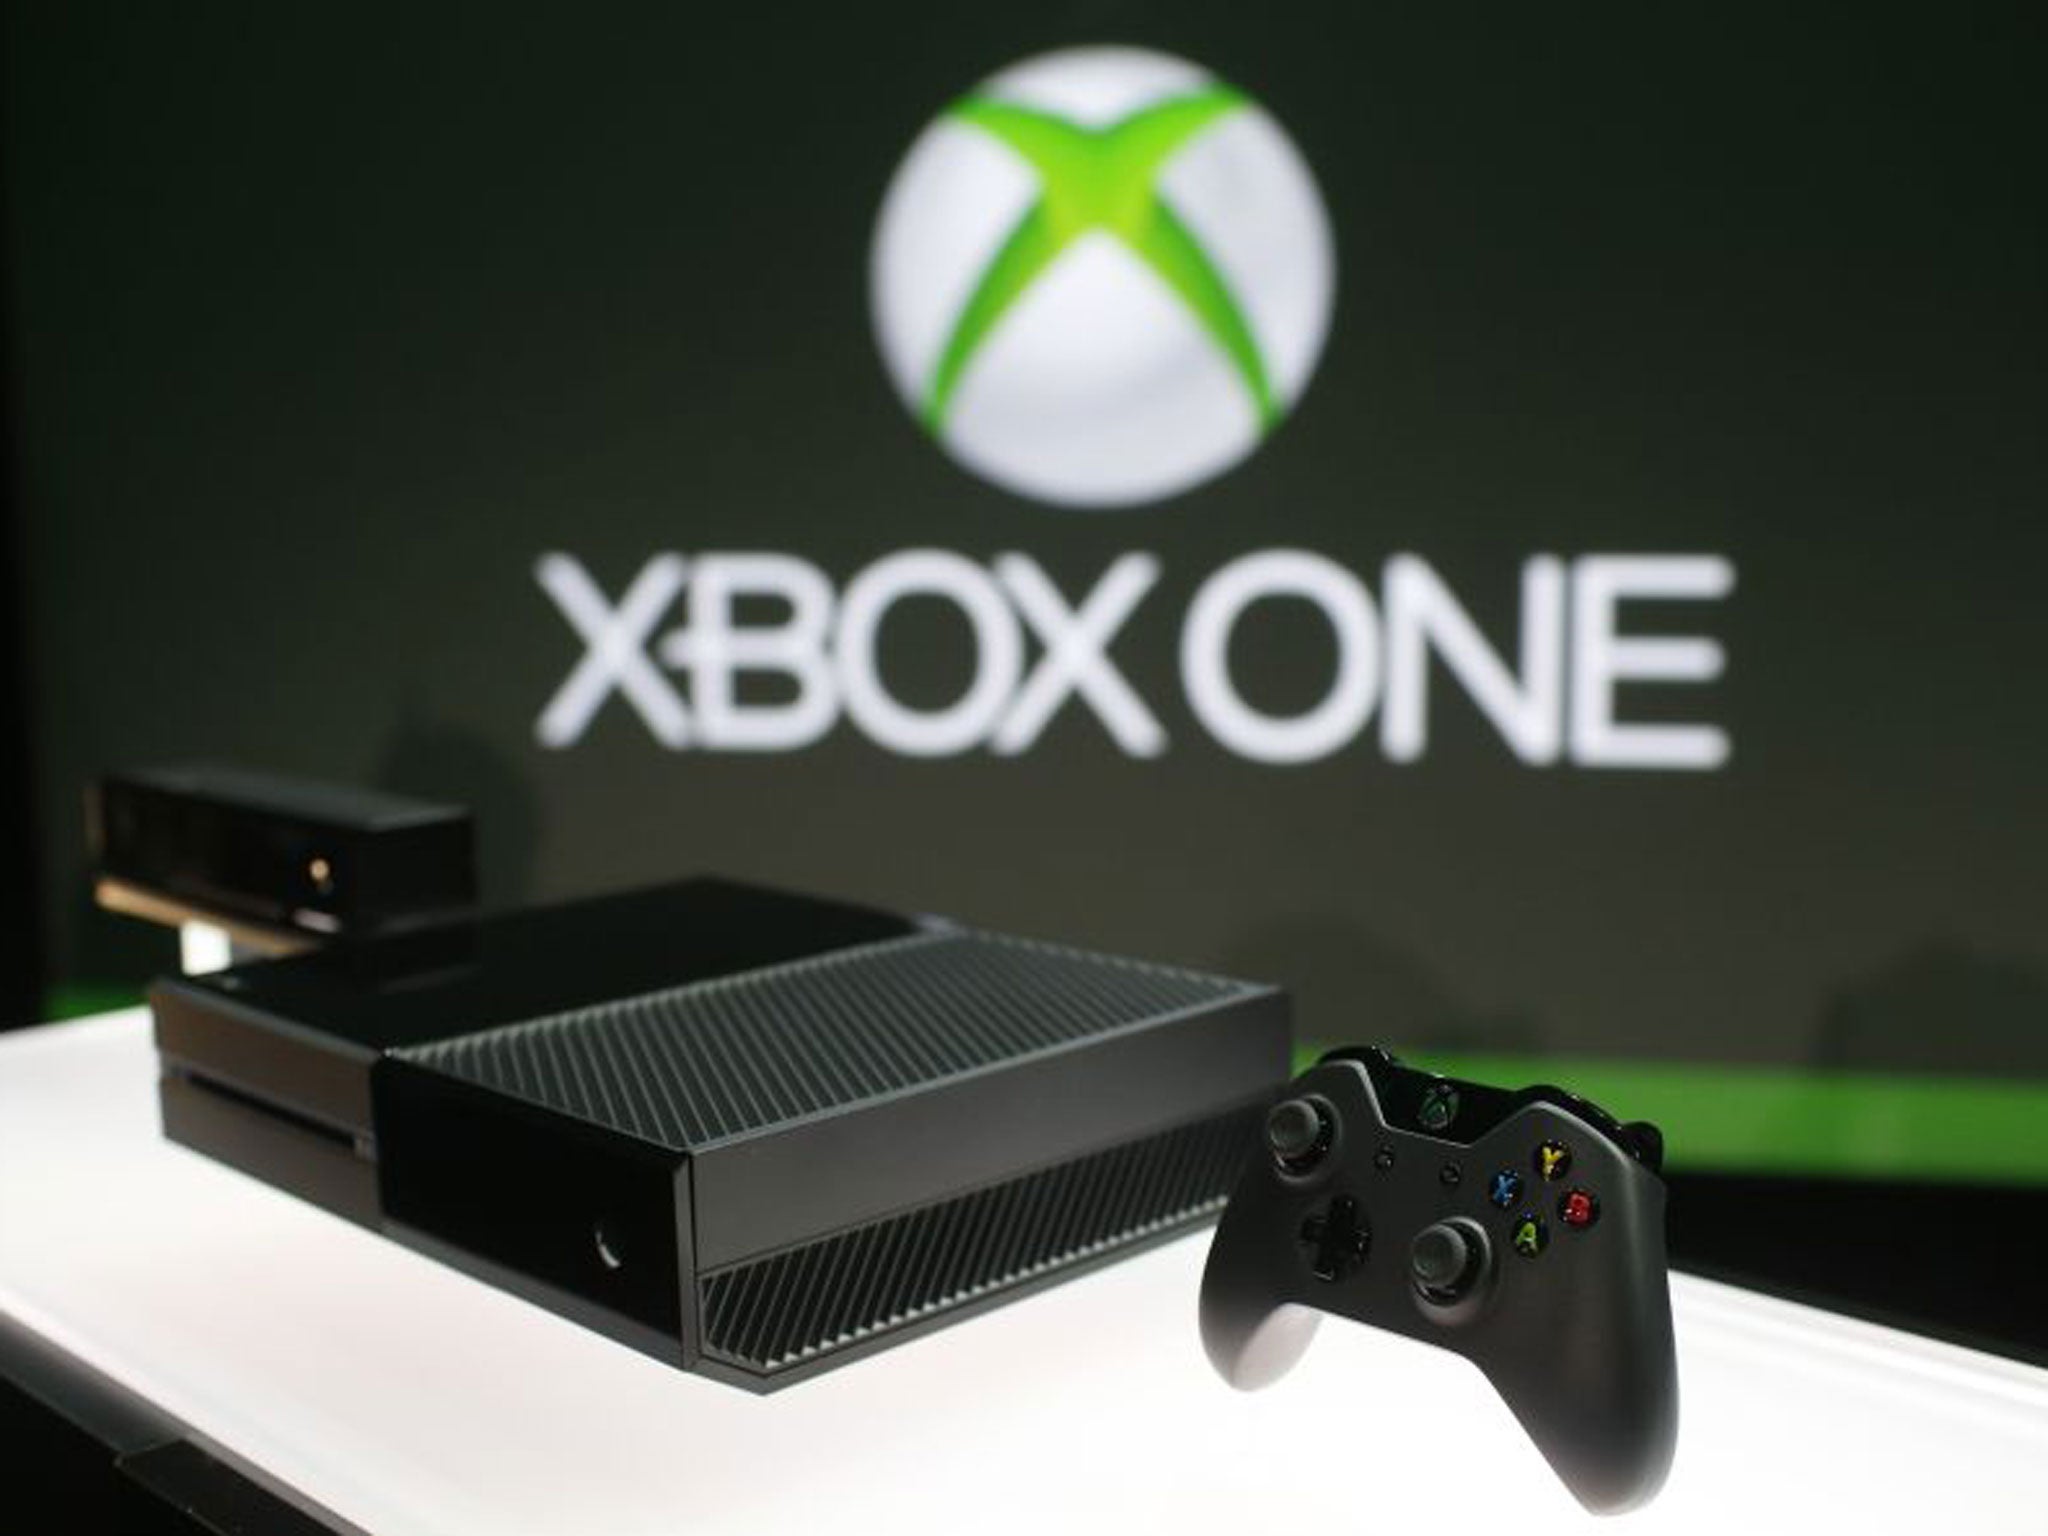 Xbox One is shown on display during a press event unveiling Microsoft's new Xbox in Redmond, Washington